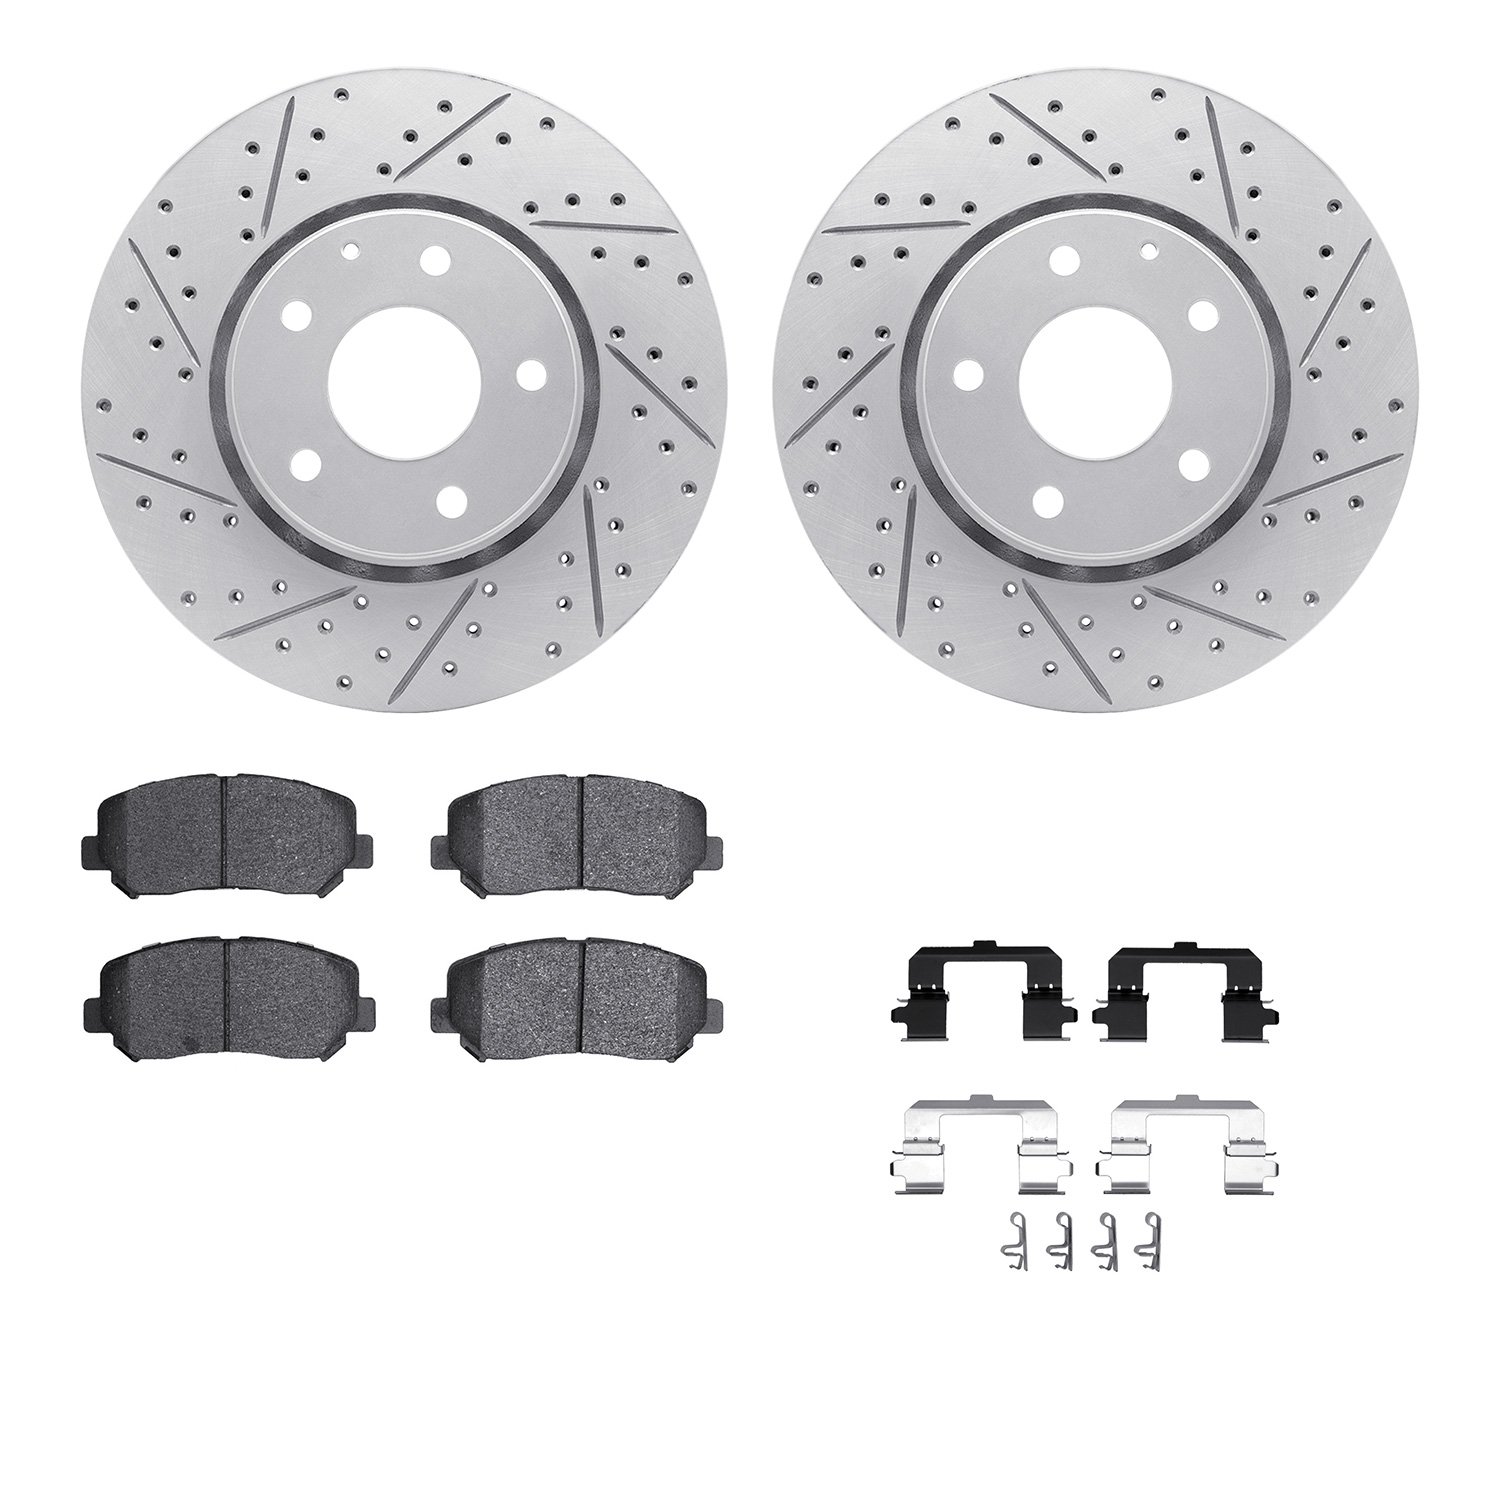 2512-80074 Geoperformance Drilled/Slotted Rotors w/5000 Advanced Brake Pads Kit & Hardware, Fits Select Ford/Lincoln/Mercury/Maz